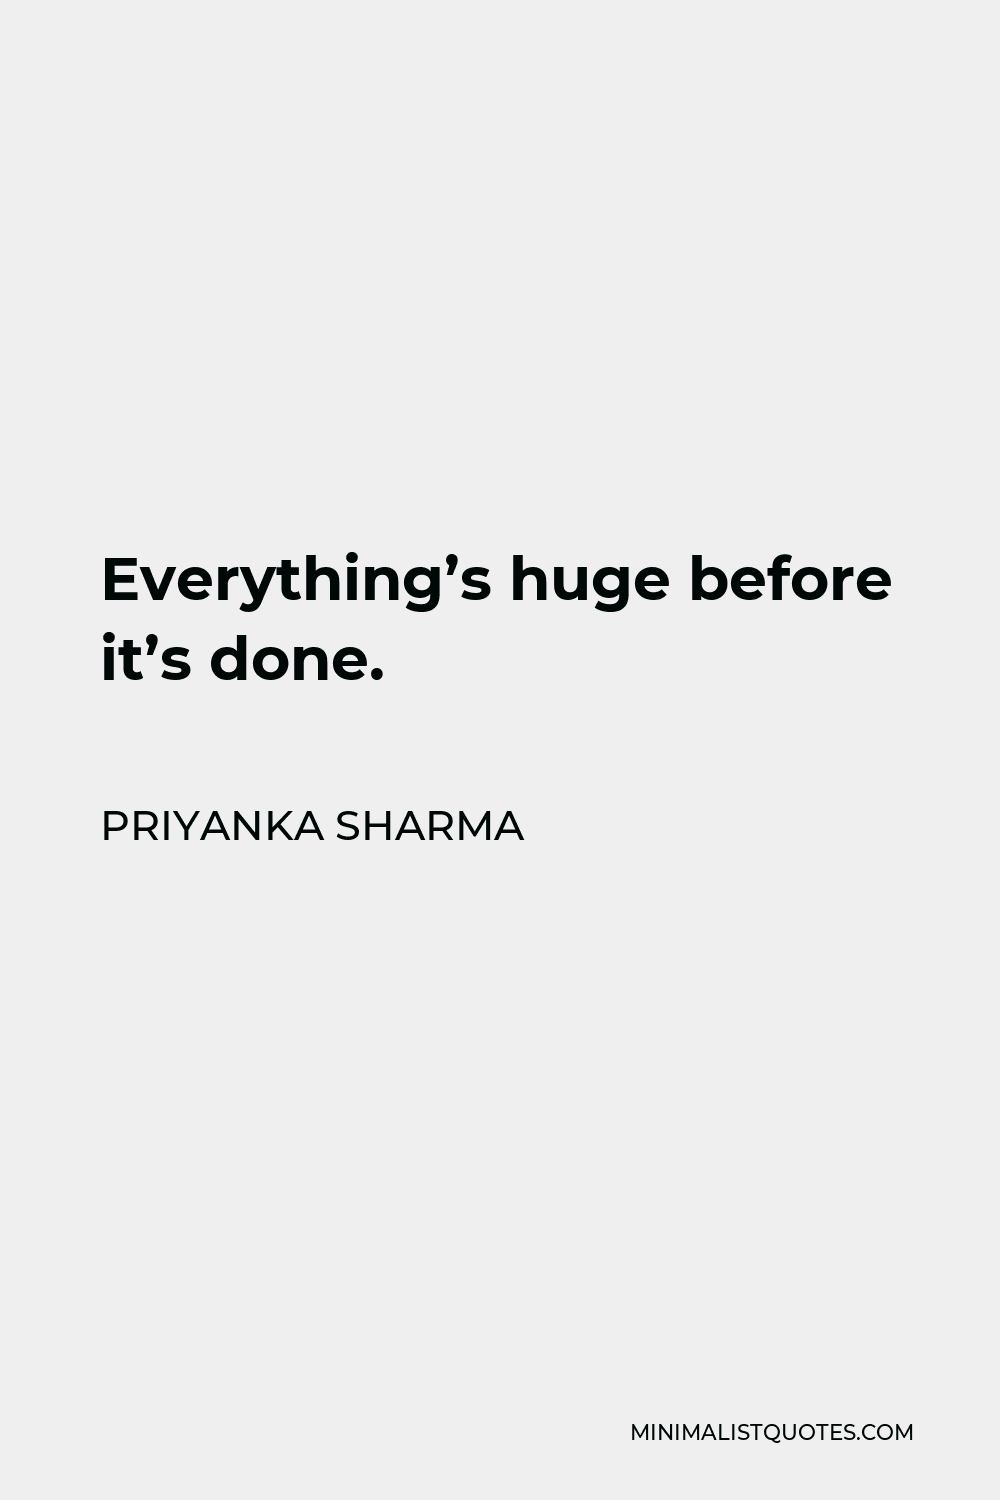 Priyanka Sharma Quote - Everything’s huge before it’s done.